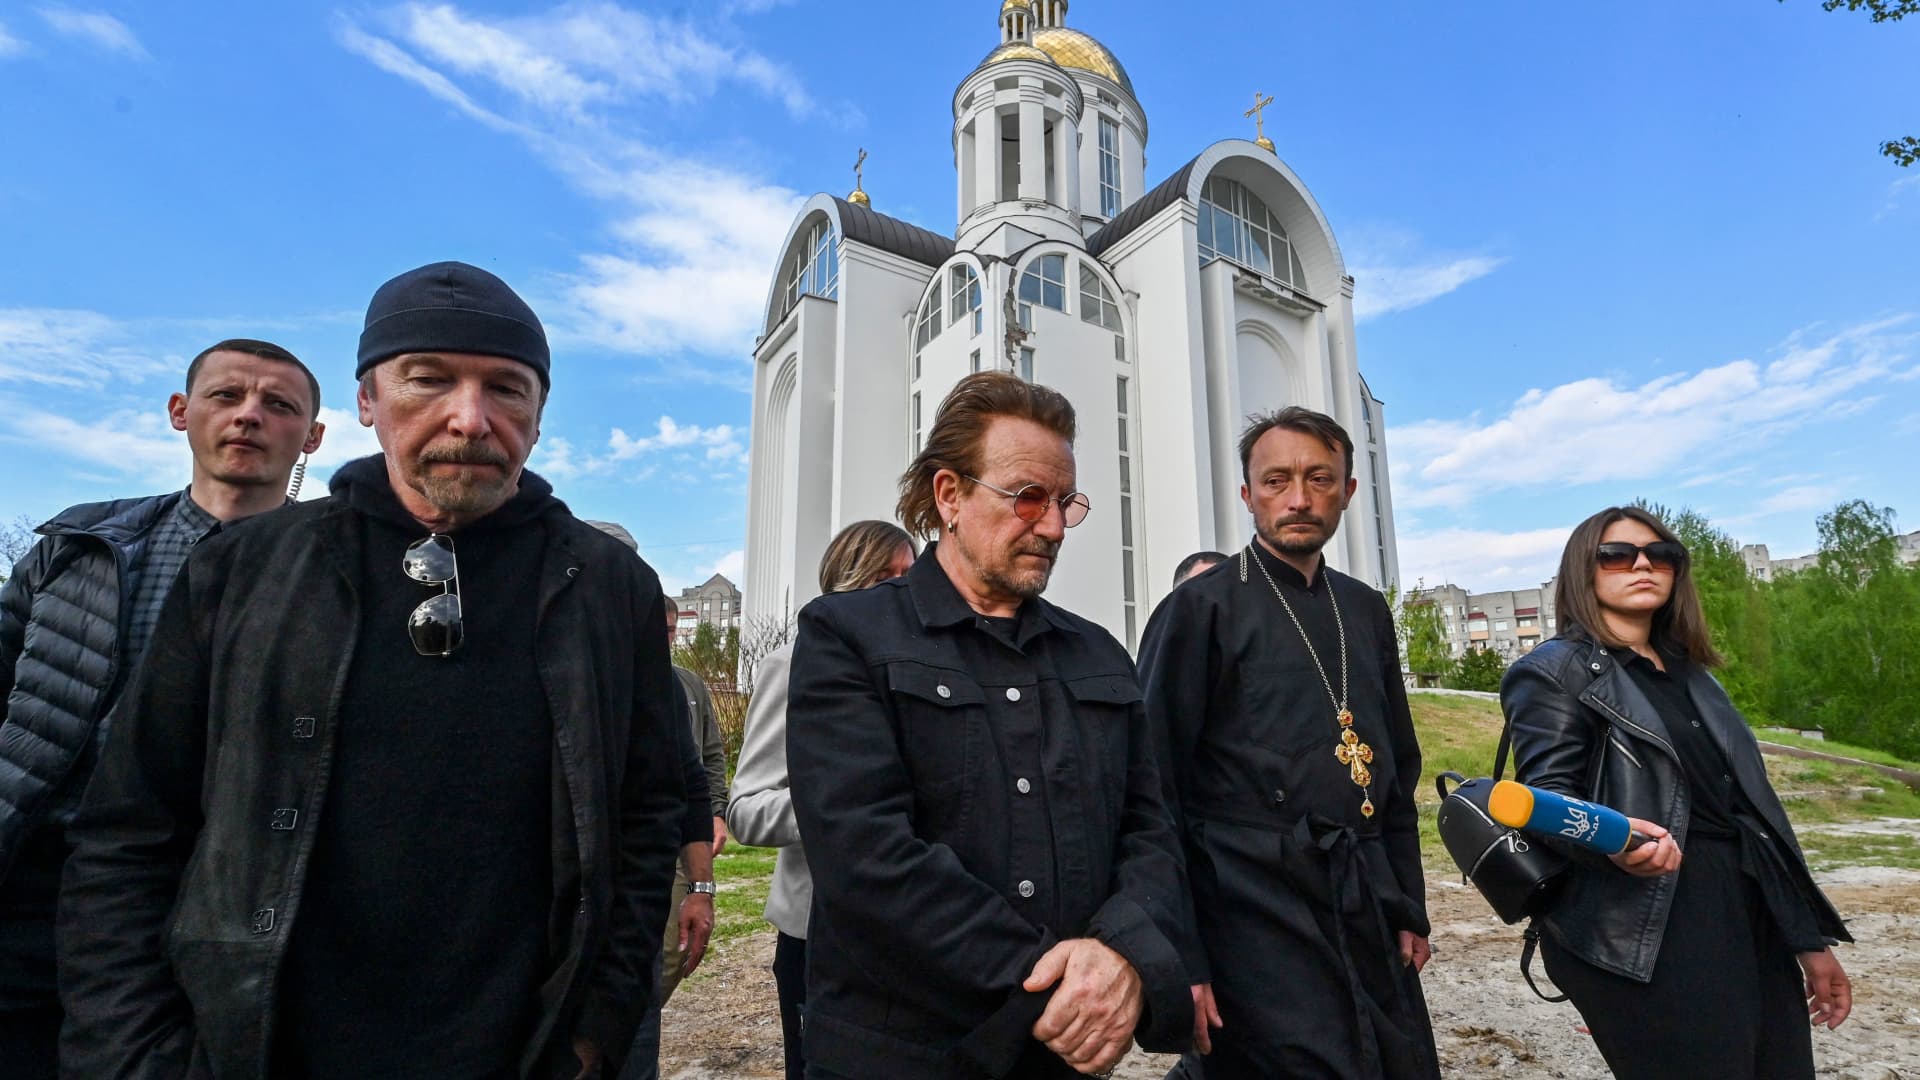 Andrii Holovine, priest of the Church of St. Andrew Pervozvannoho All Saints (2nd,R) guides Bono (C) (Paul David Hewson), activist and front man of the Irish rock band U2 and guitarist David Howell Evans aka 'The Edge' (R) visiting the site of a mass grave by the church in the Ukrainian town of Bucha, near Kyiv on May 8, 2022.